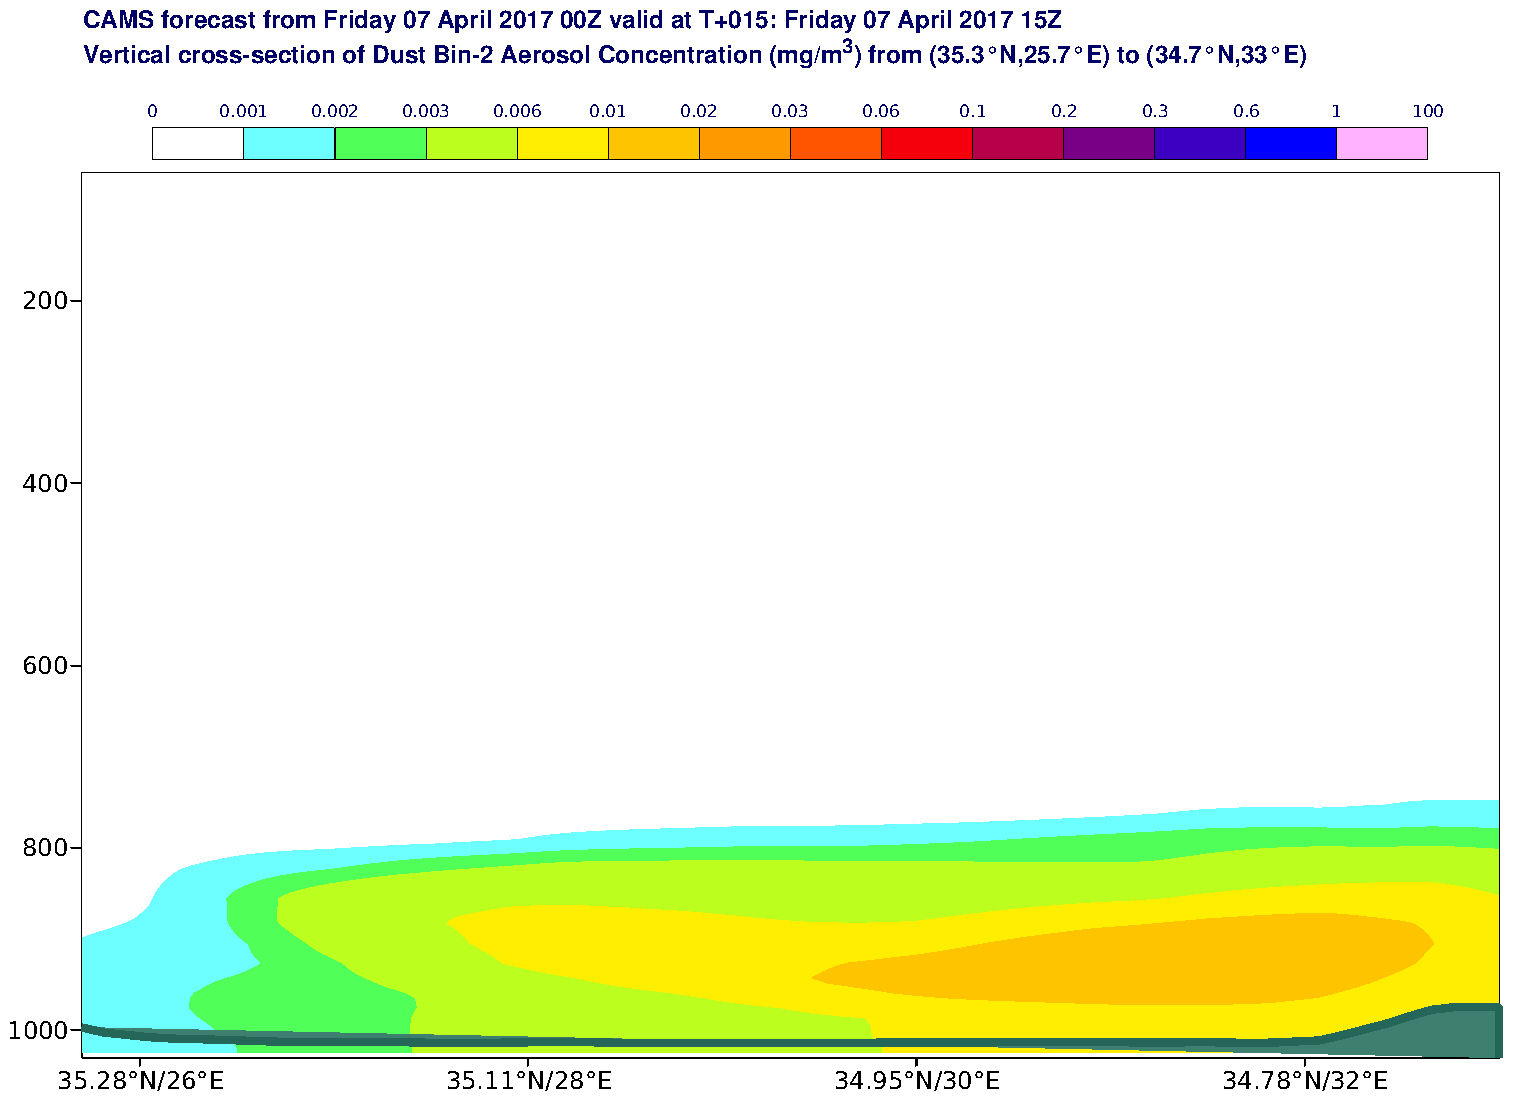 Vertical cross-section of Dust Bin-2 Aerosol Concentration (mg/m3) valid at T15 - 2017-04-07 15:00